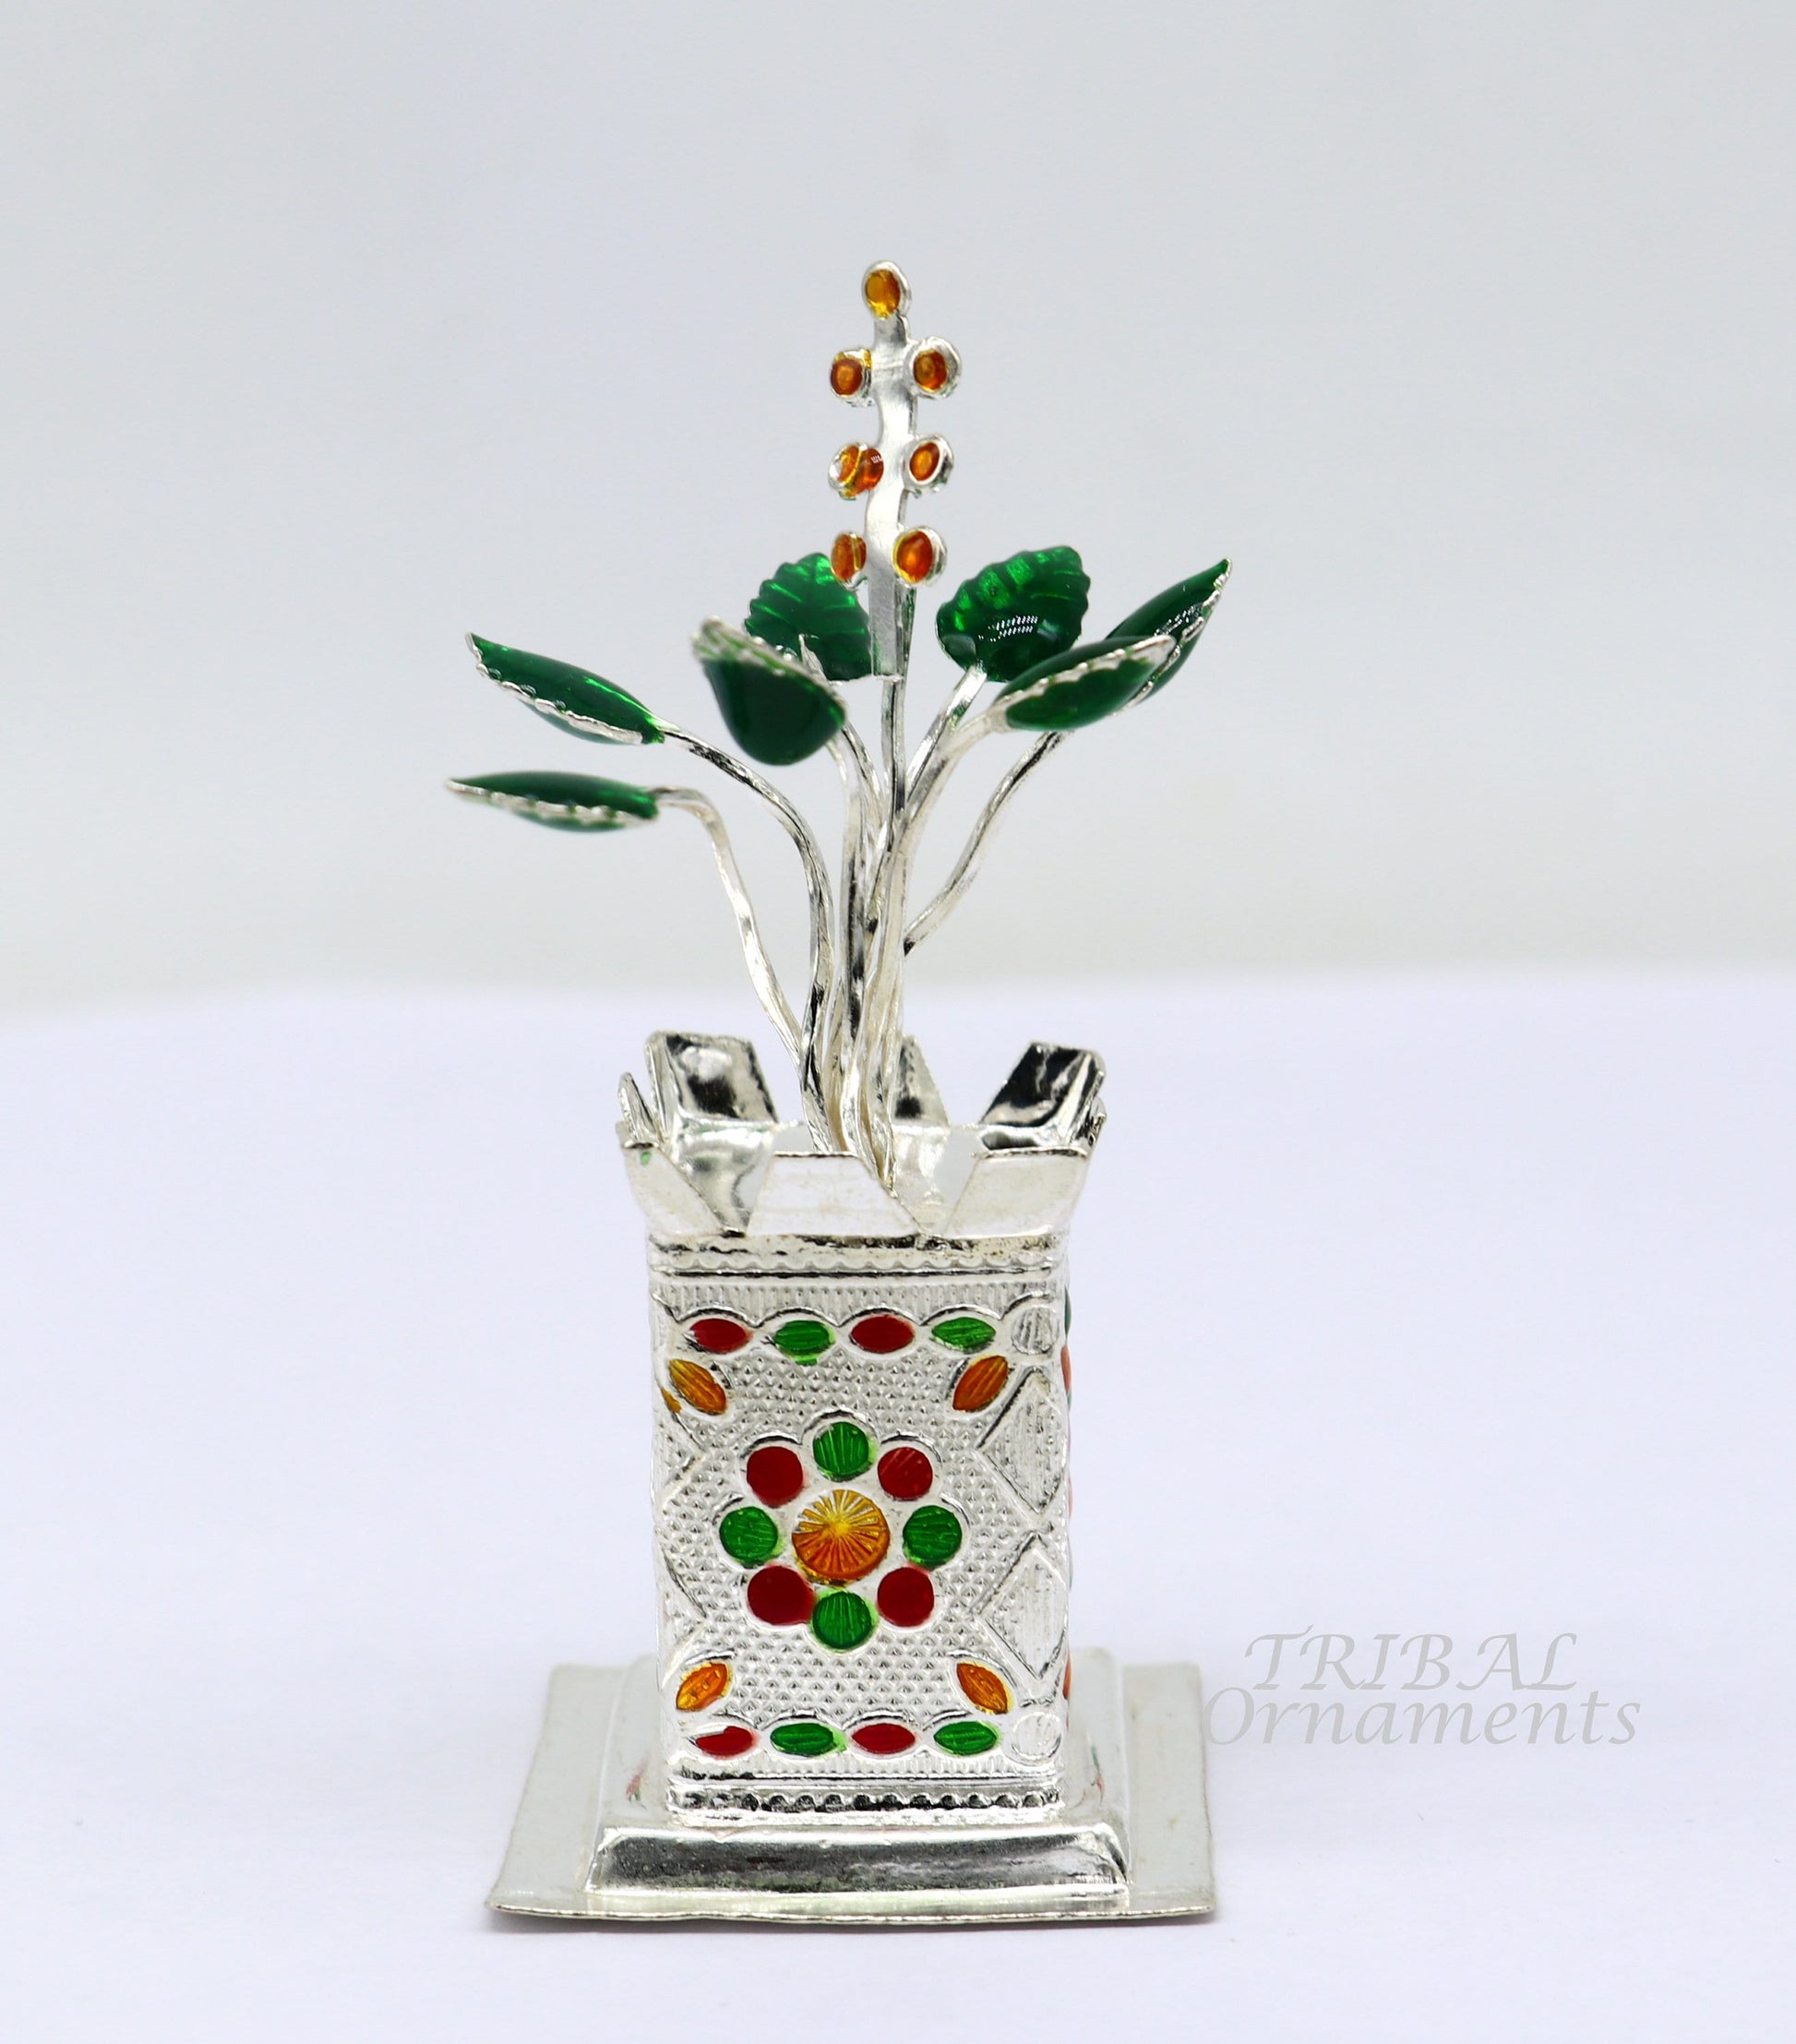 925 sterling silver handmade small tulsi plant basil rosary plant, puja temple article, excellent customized silver utensils article su924 - TRIBAL ORNAMENTS